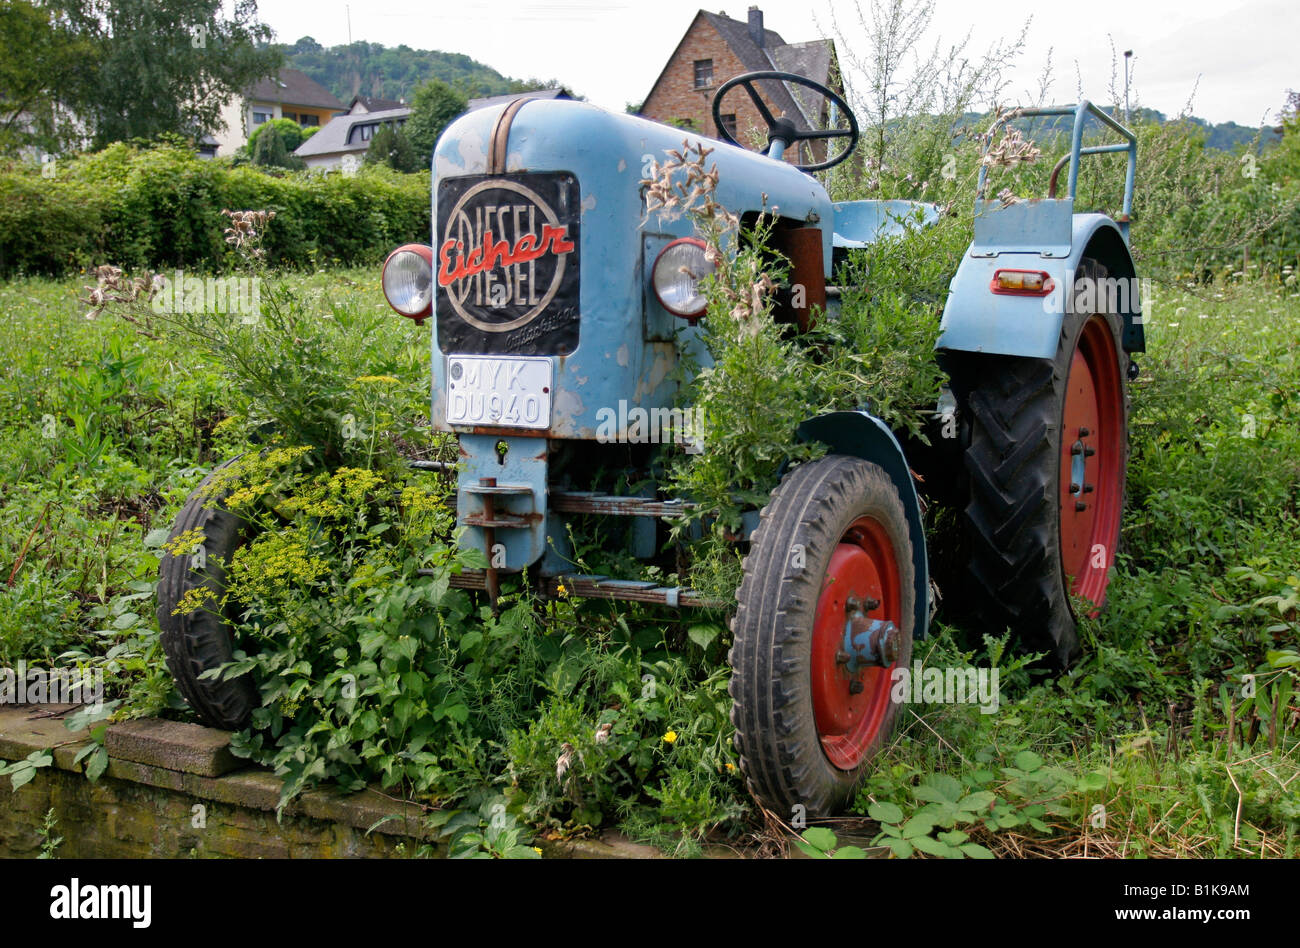 Old German Eicher diesel tractor, in Mosel area of Germany Stock Photo